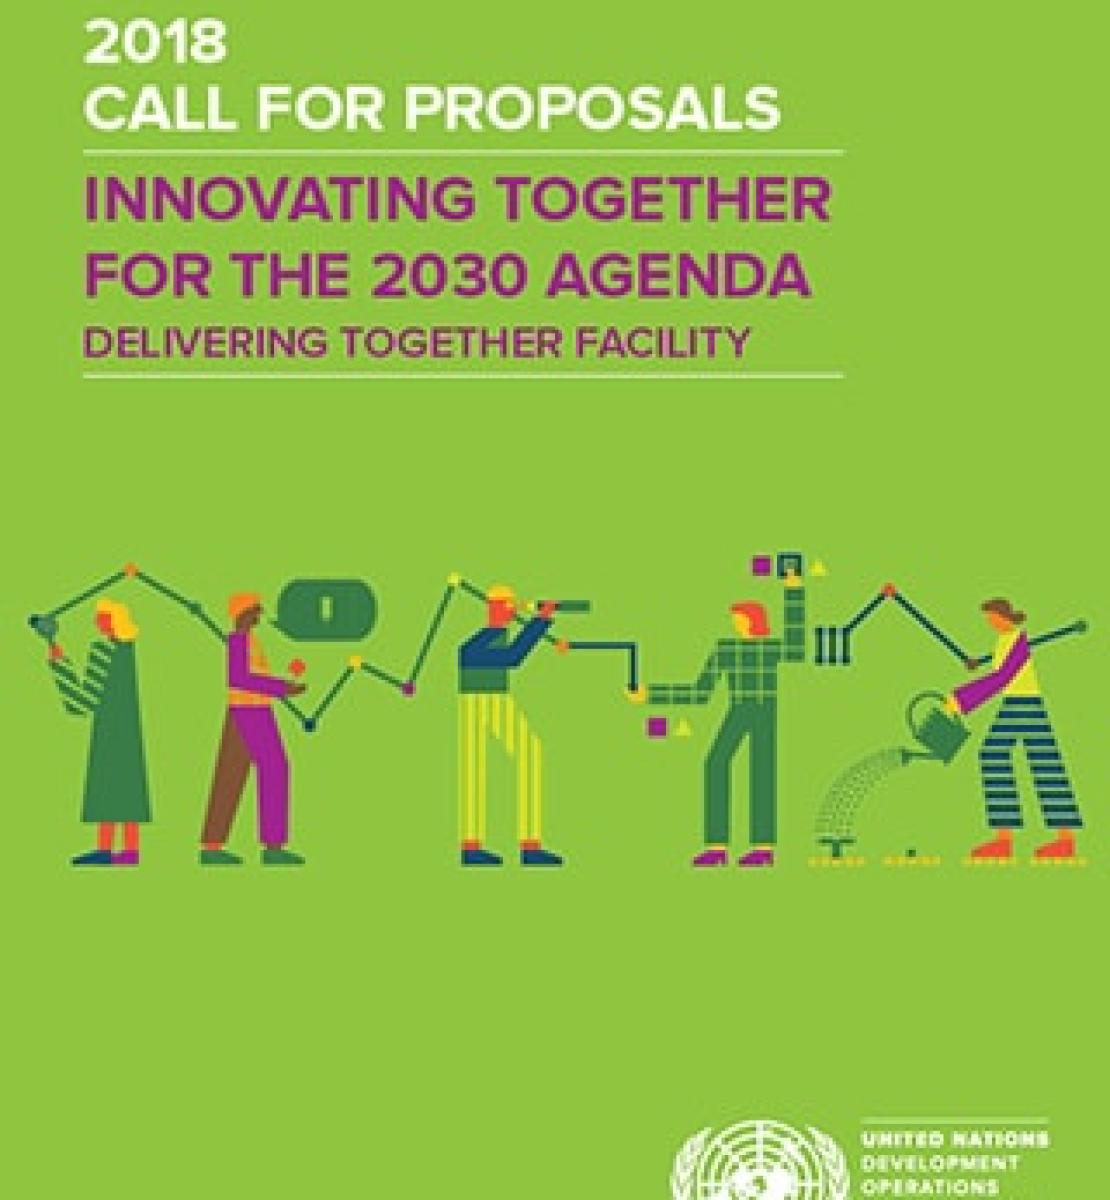 2018 CALL FOR PROPOSALS - INNOVATING TOGETHER FOR THE 2030 AGENDA